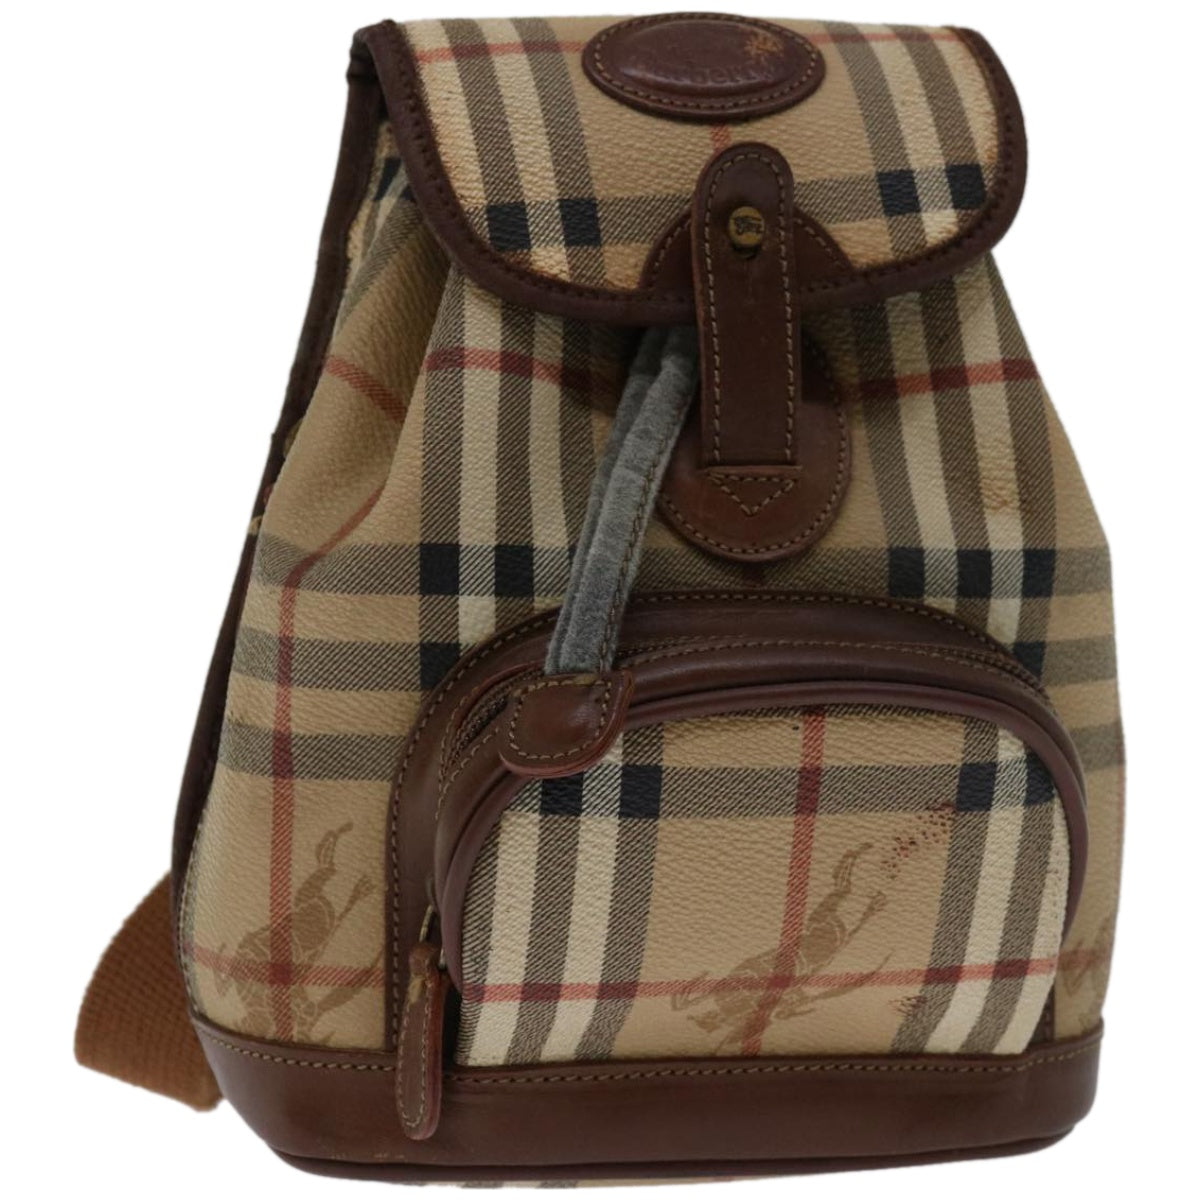 Burberrys Nova Check Backpack PVC Leather Beige Red Auth bs12214